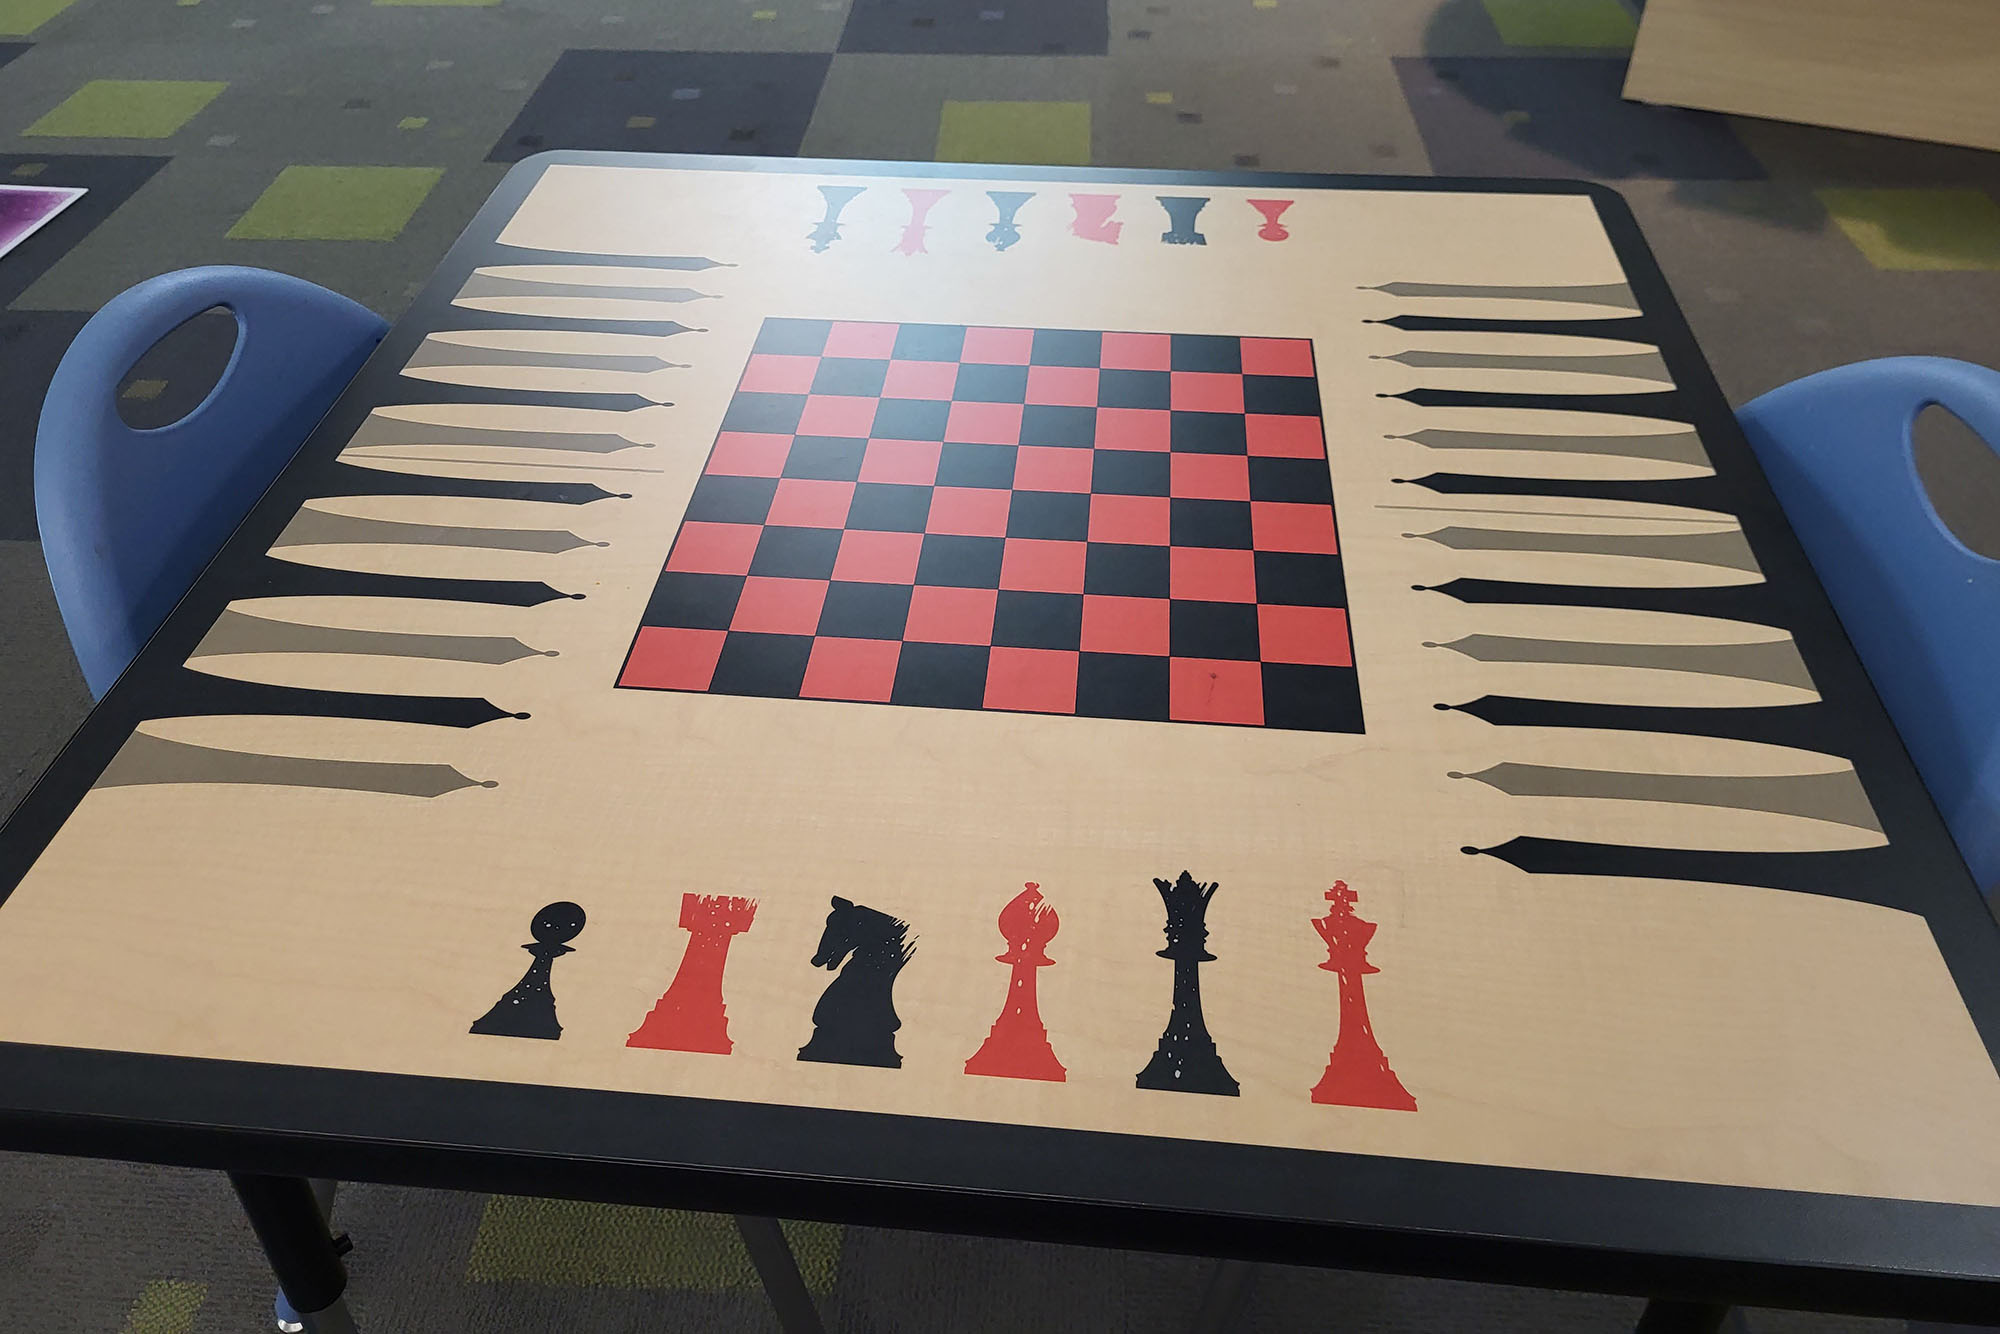 This is a sample photo of a chess board from the main camera of the Samsung Galaxy S21 FE 5G..